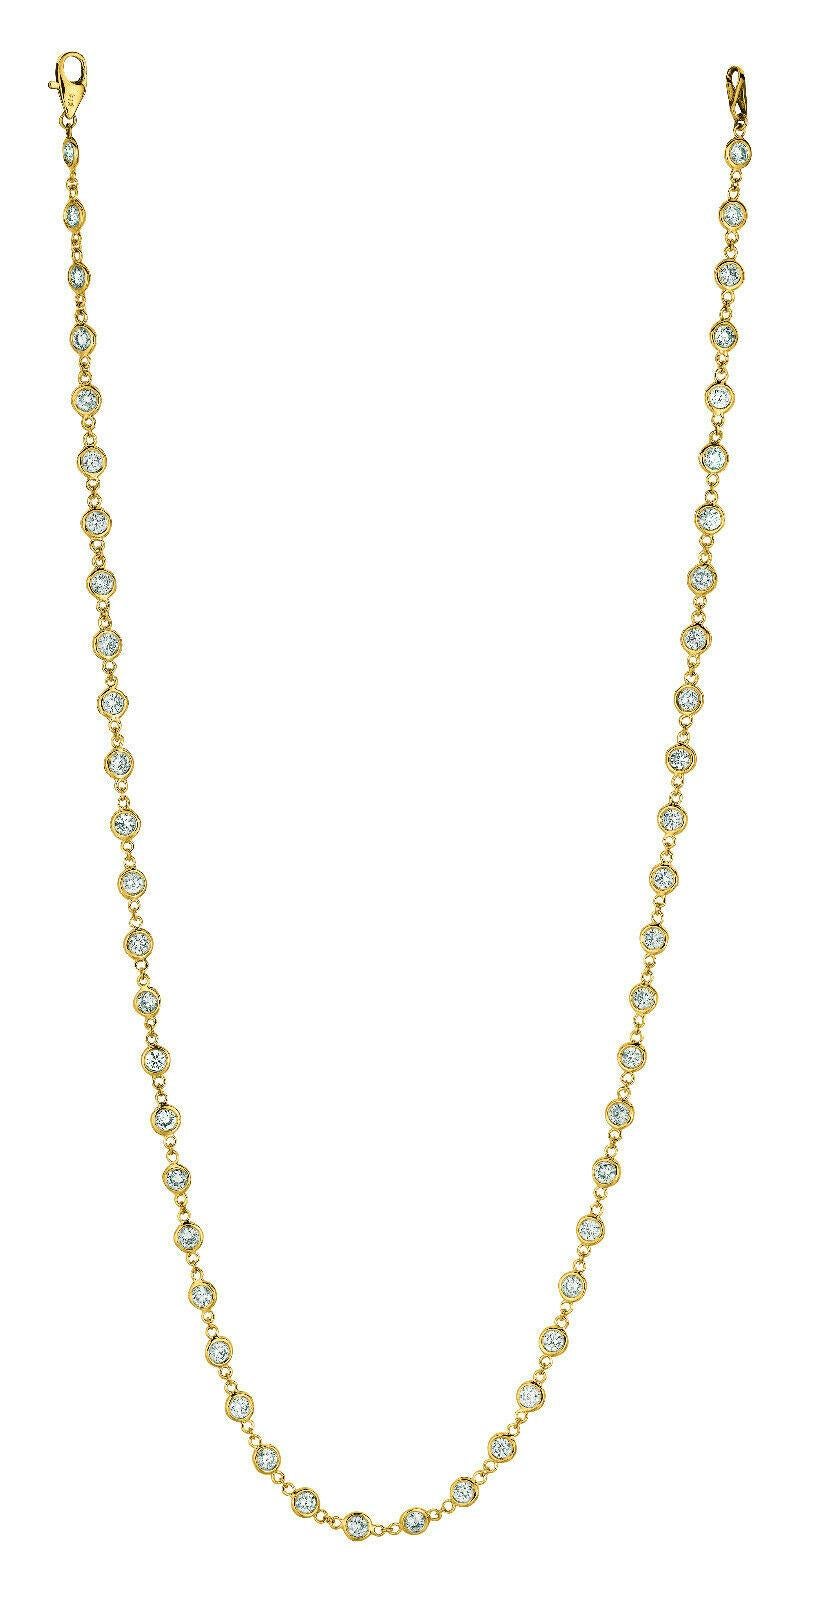 1.51 Carat Diamond by the Yard Necklace G SI 14K Yellow Gold 17 inches 67 stones 2 pointers

100% Natural Diamonds, Not Enhanced in any way Round Cut Diamond by the Yard Necklace  
1.51CT
G-H 
SI  
14K Yellow Gold, Bezel style,  5.4 gram
17 inches